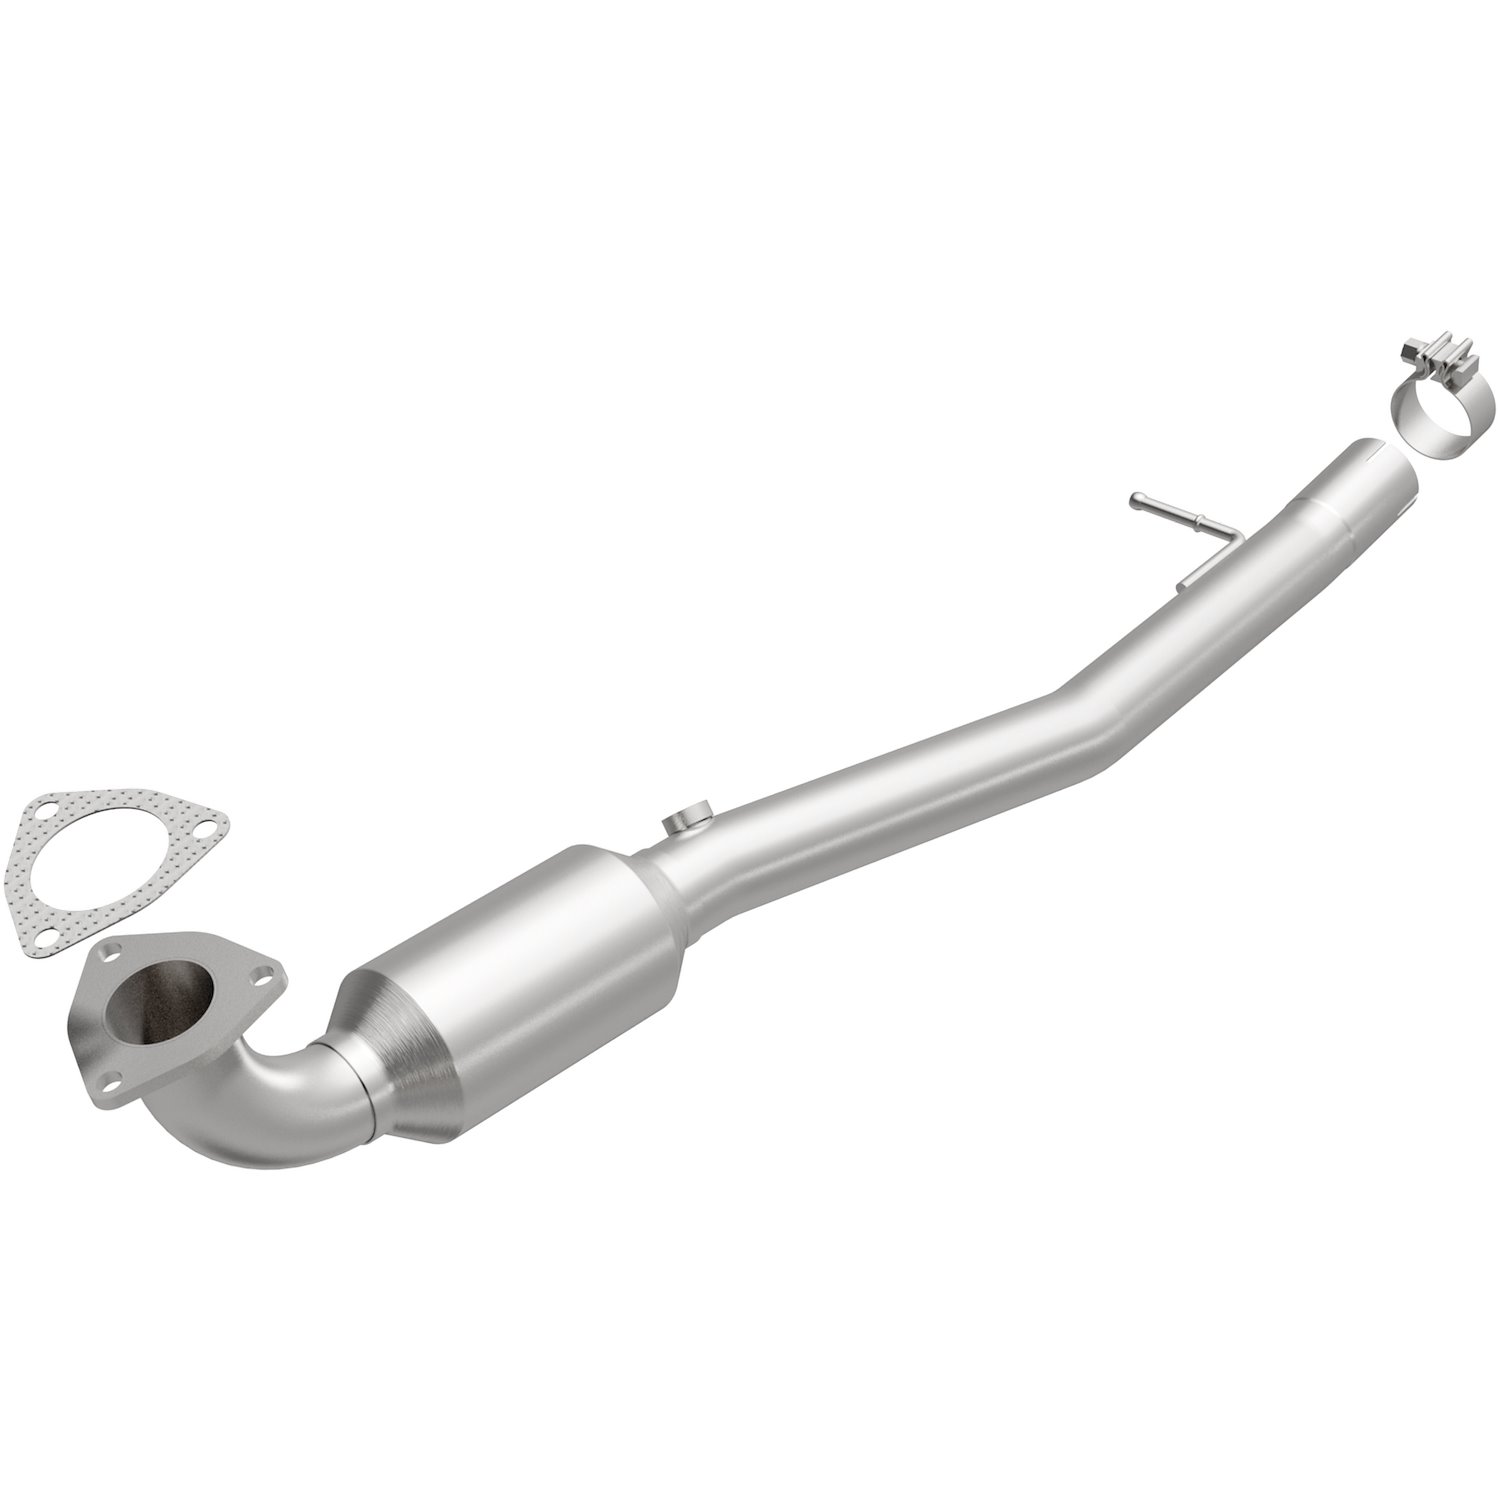 2007-2009 Land Rover Range Rover California Grade CARB Compliant Direct-Fit Catalytic Converter